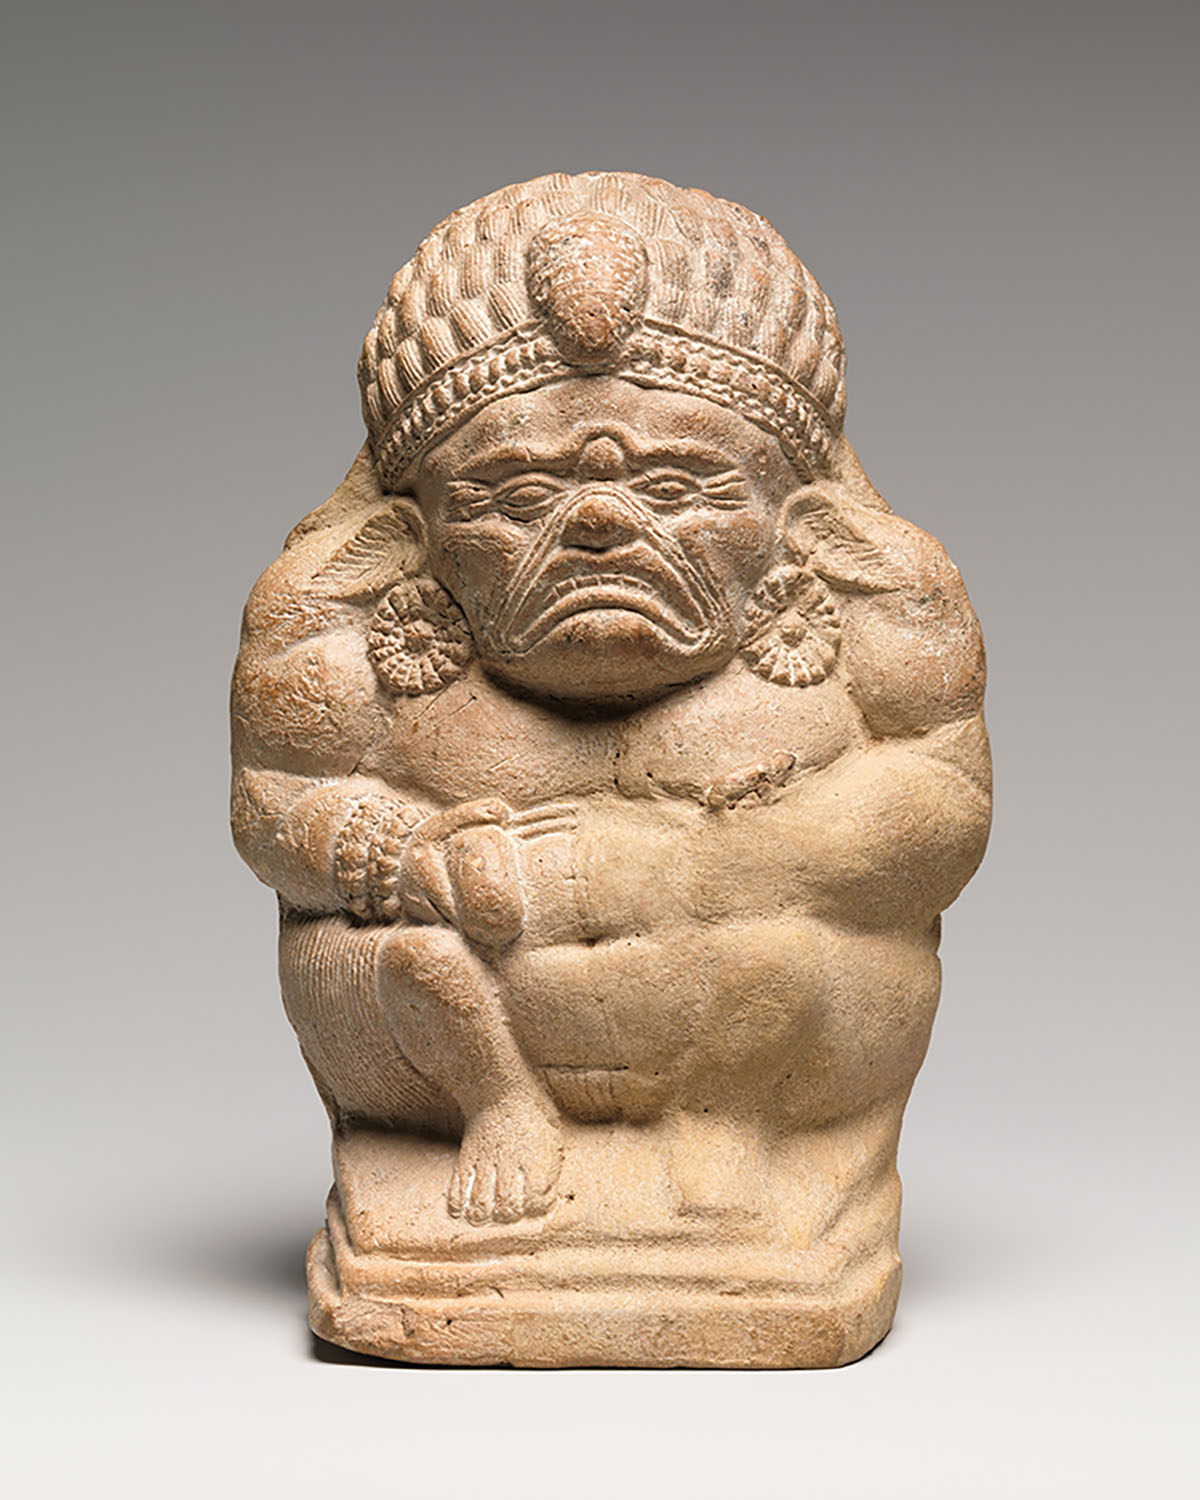 A figurine depicting a crouching figure with clasped hands and a sour expression.